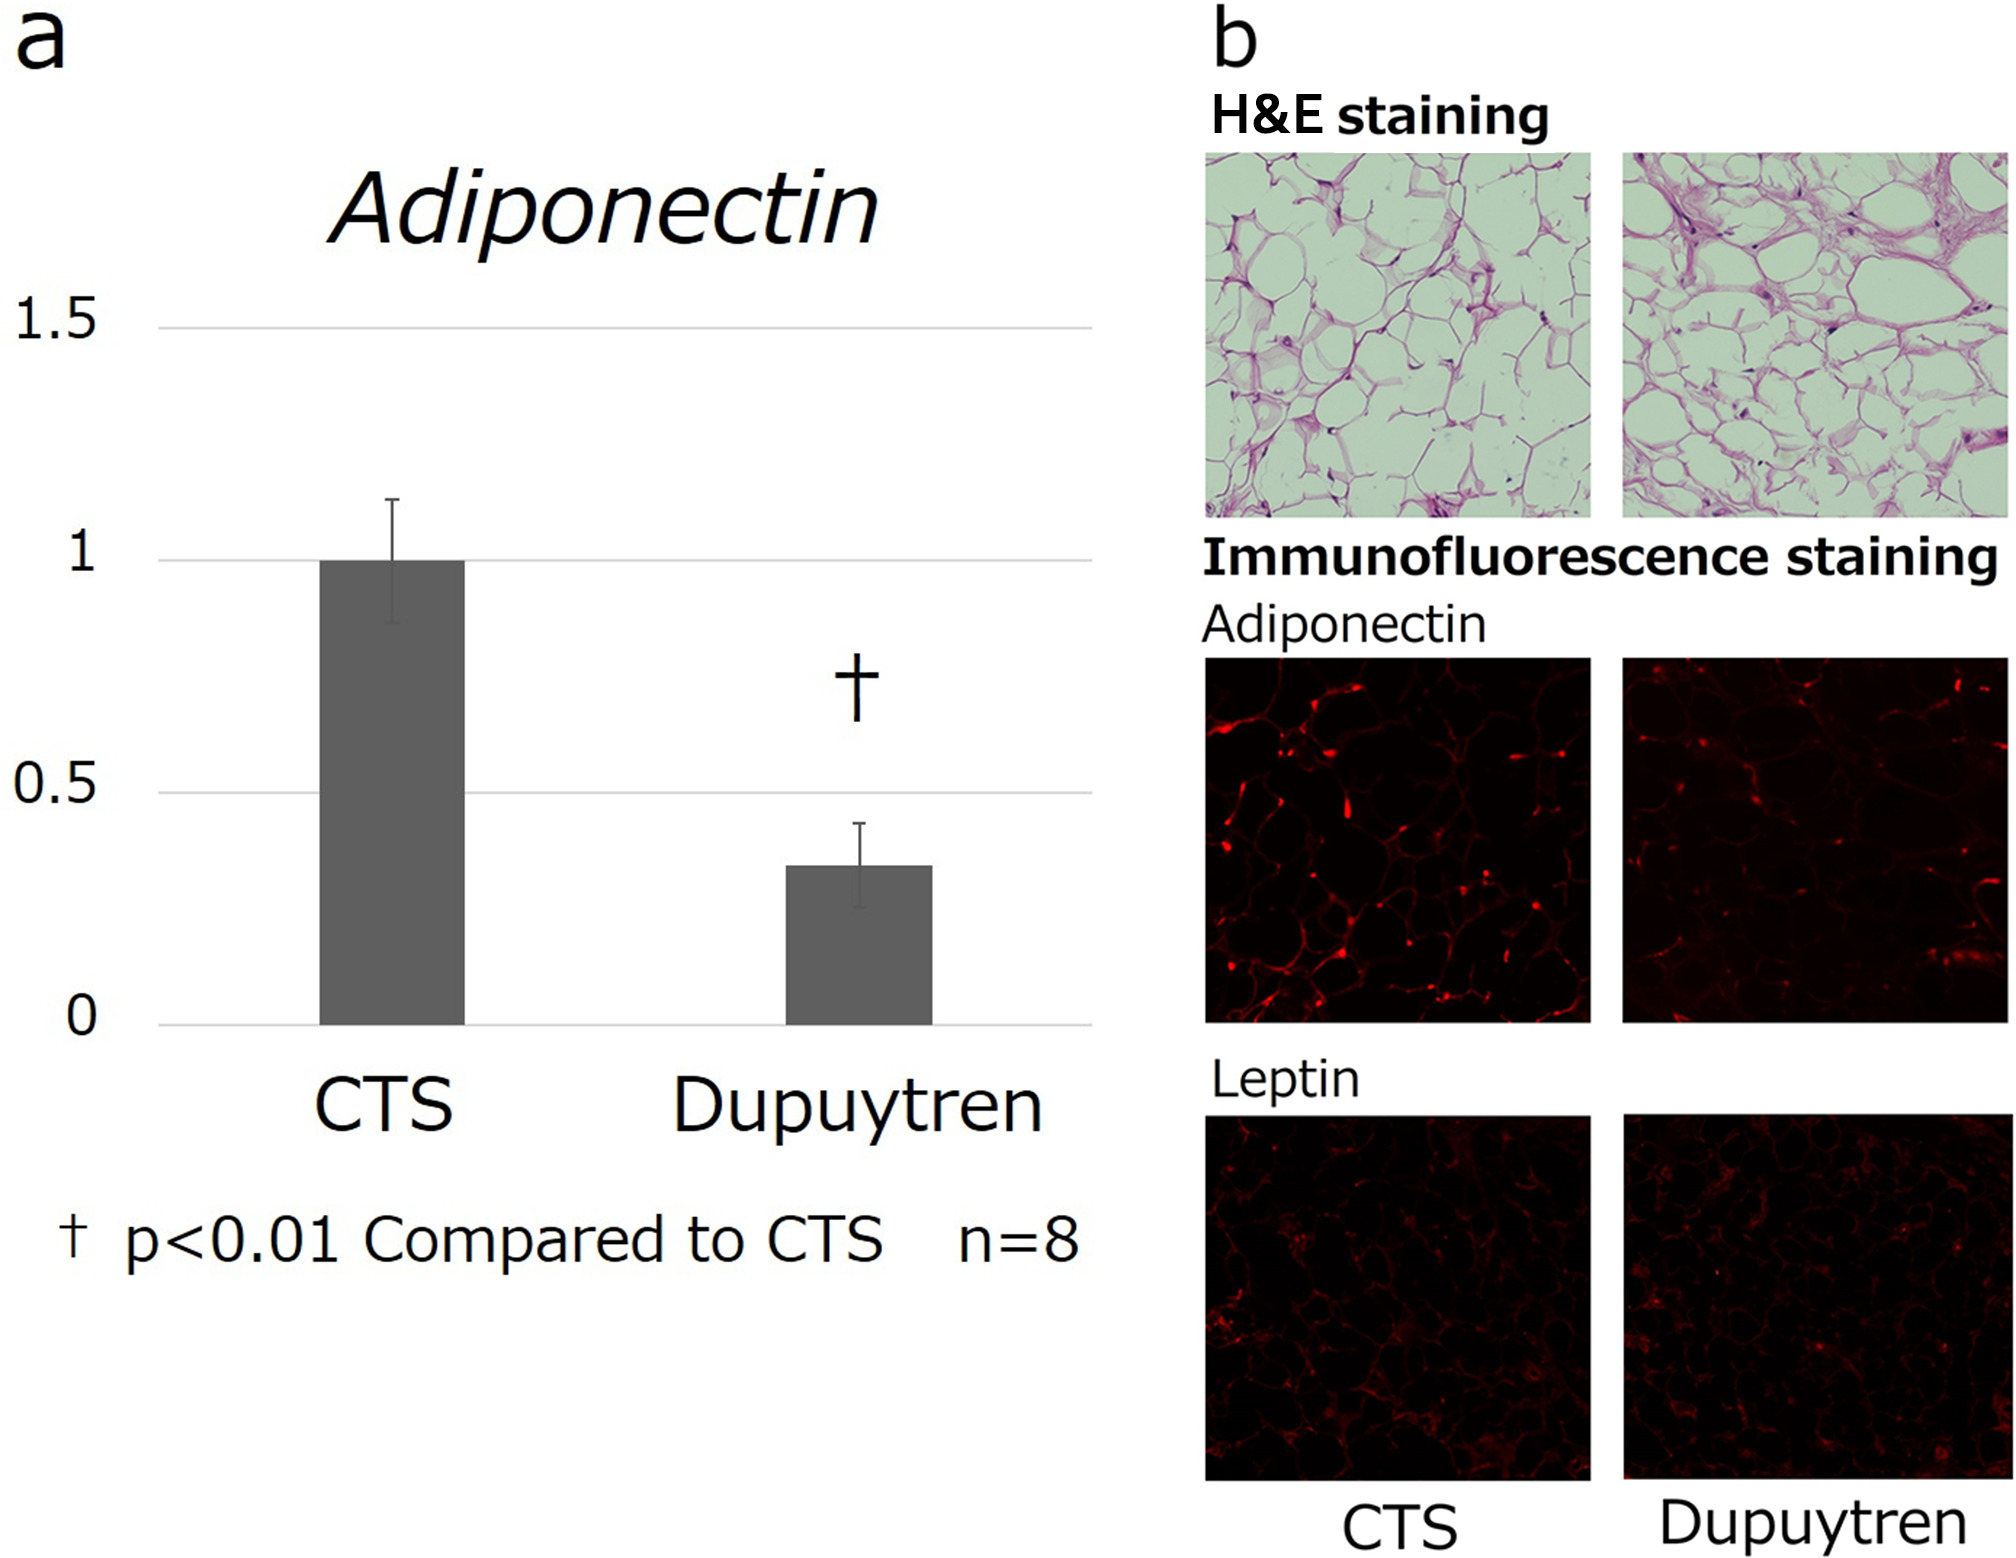 Fig. 1 
            a) Adiponectin gene expression was significantly decreased in the Dupuytren’s contracture group compared to that in the carpal tunnel syndrome (CTS) group (p < 0.001) (n = 8). Gene expression was normalized against the CTS. All results are expressed as means and standard error. b) Fluorescence immunohistochemical staining showing decreased protein expression in the Dupuytren’s contracture group compared to the CTS group (20×). H&E, haematoxylin and eosin.
          